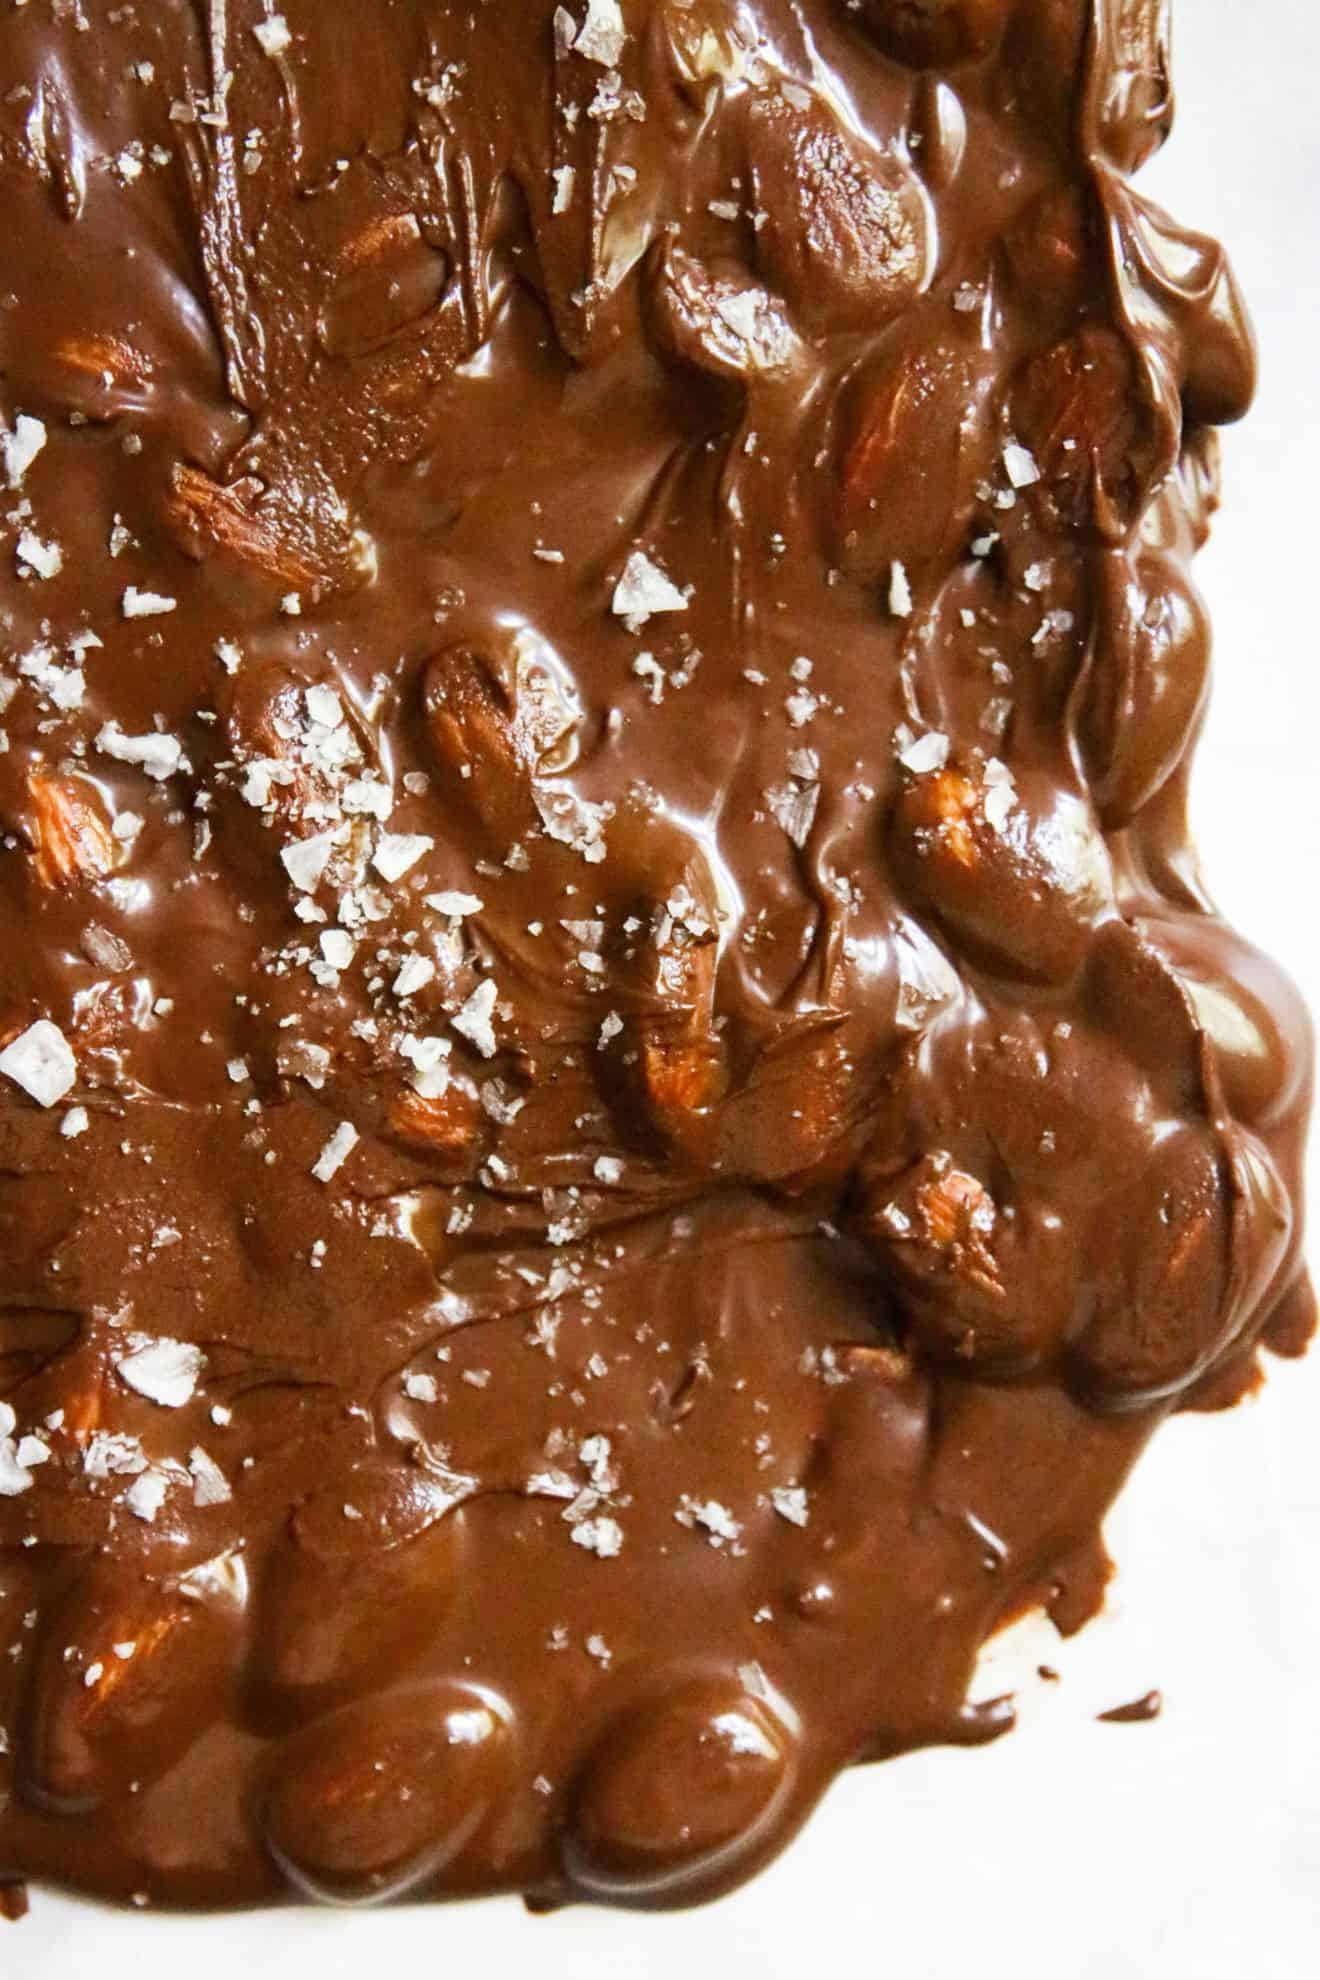 This is an overhead image of melted chocolate with almonds spread out on a white piece of parchment paper. The chocolate is sprinkled with flakey salt.